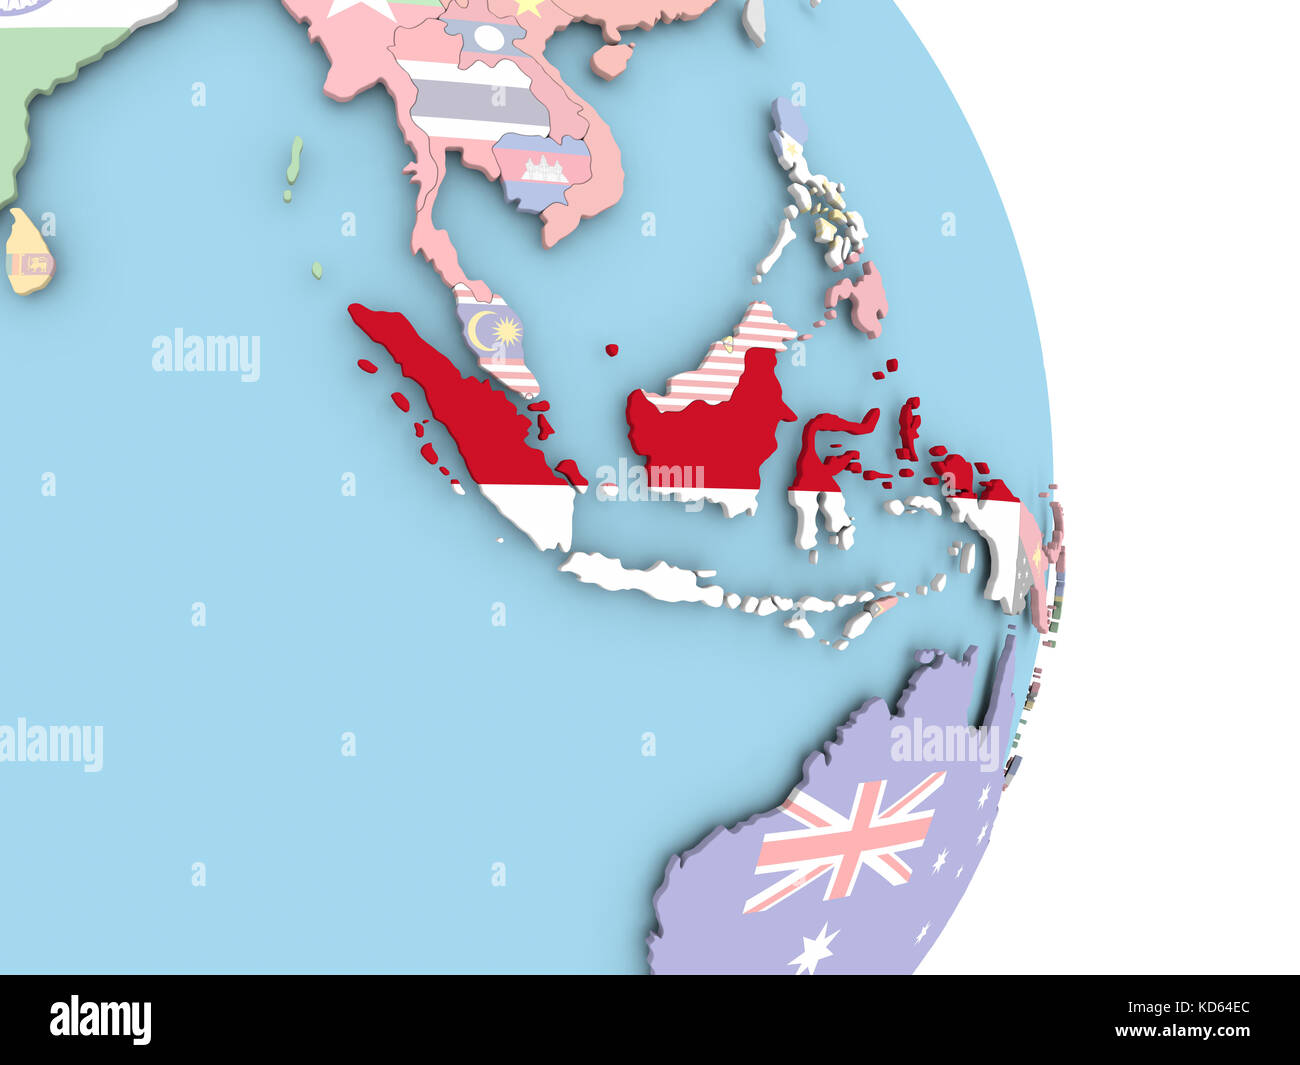 Indonesia with embedded flag on globe. 3D illustration. Stock Photo